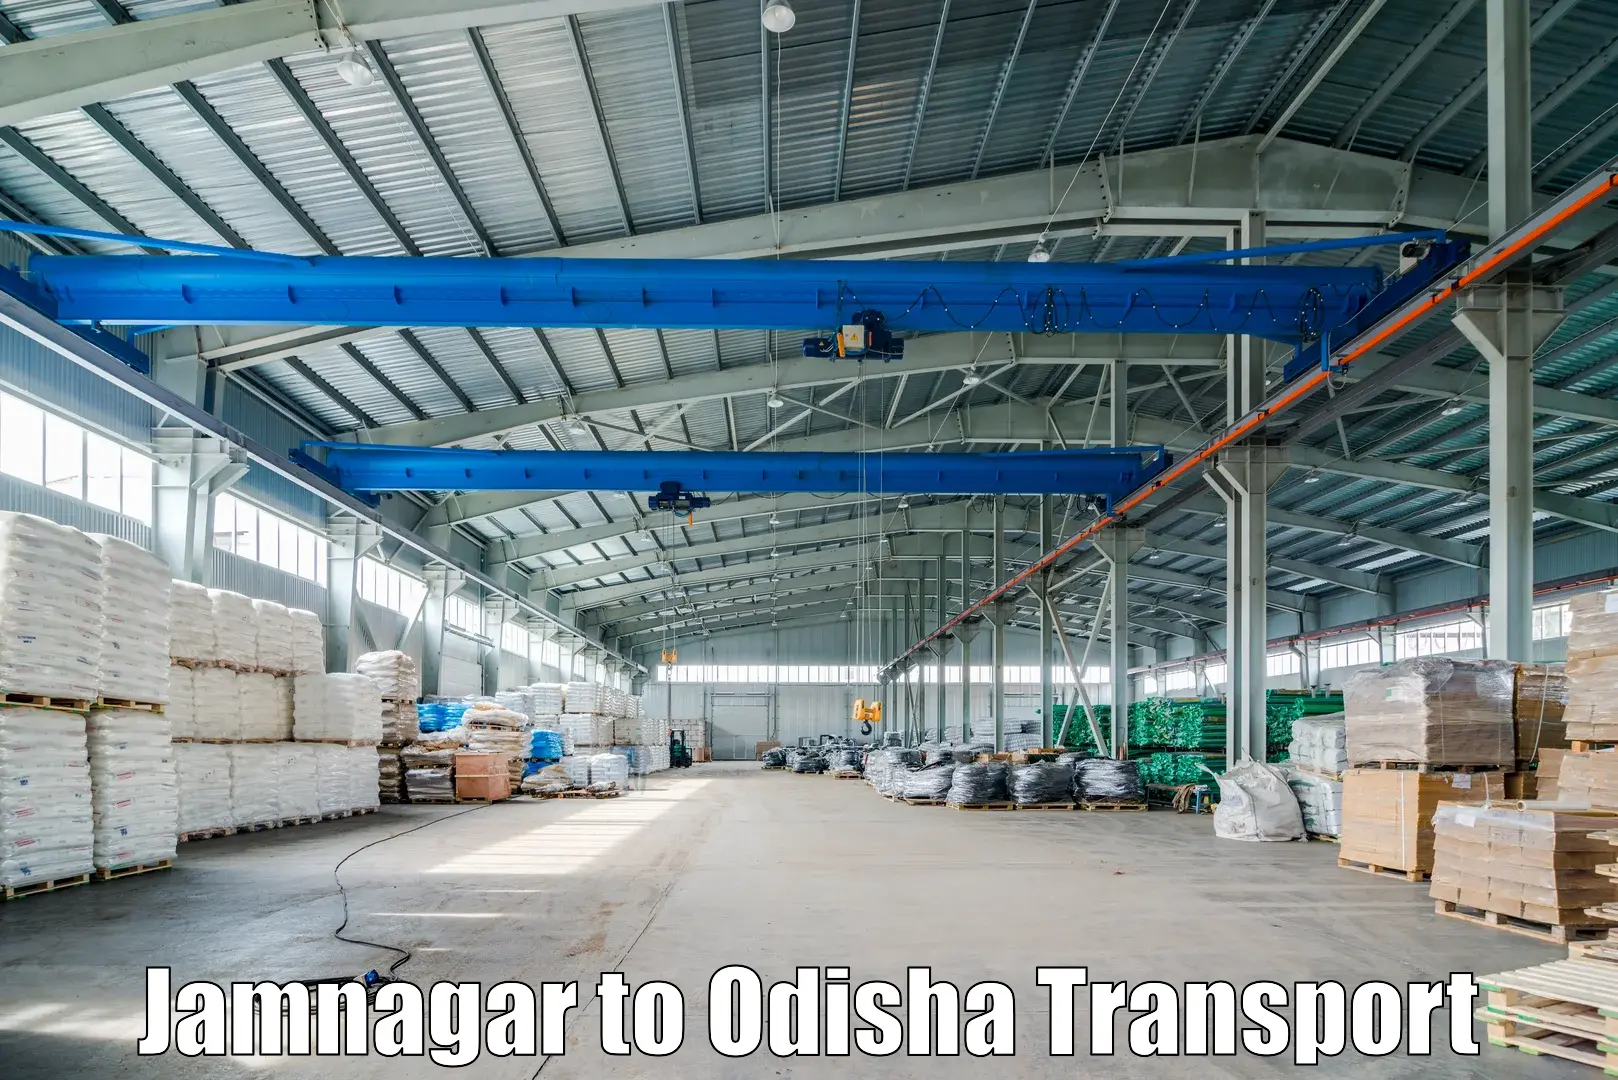 Transport bike from one state to another Jamnagar to Jharsuguda